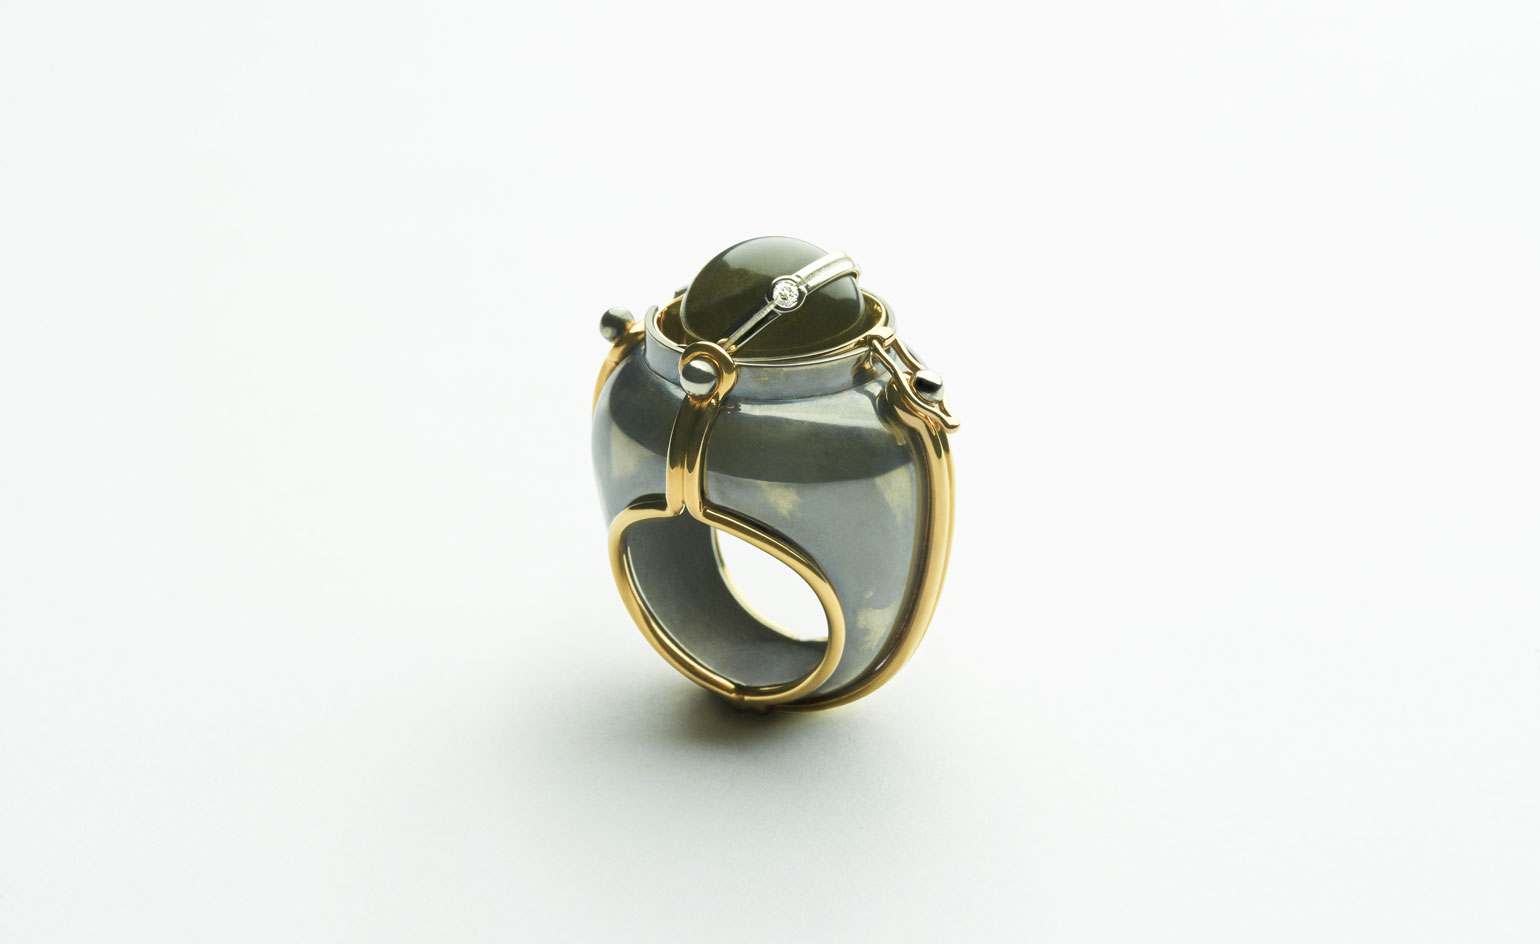 Artist-Made Jewelry With Contemporary Creations by CADA